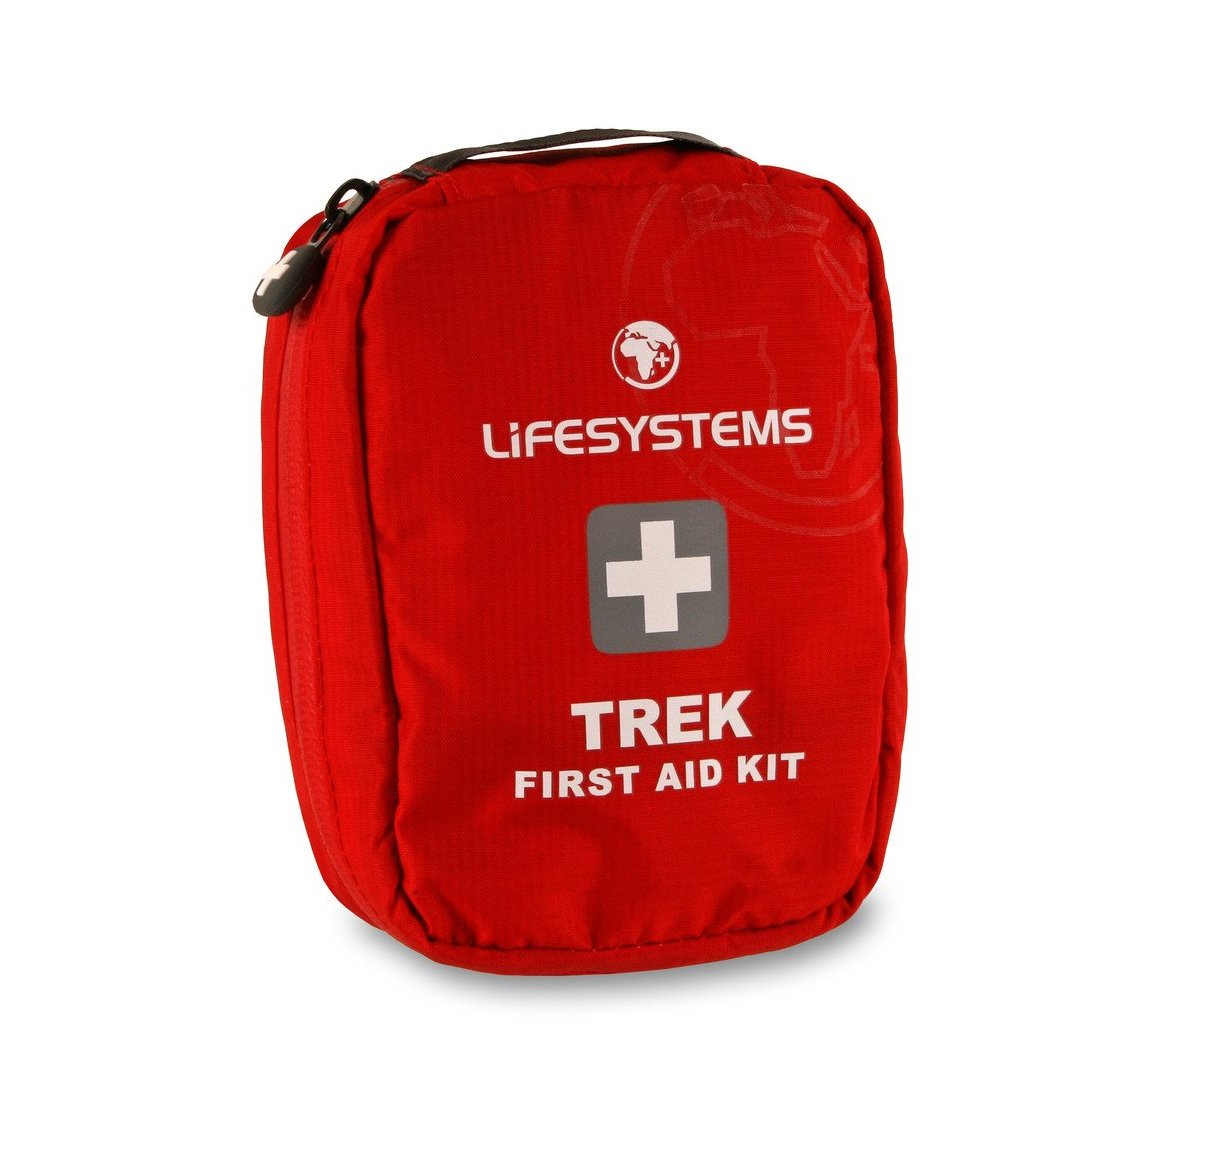 Lifesystems Trek First Aid Kit | Hiking and Camping Gear | NZ